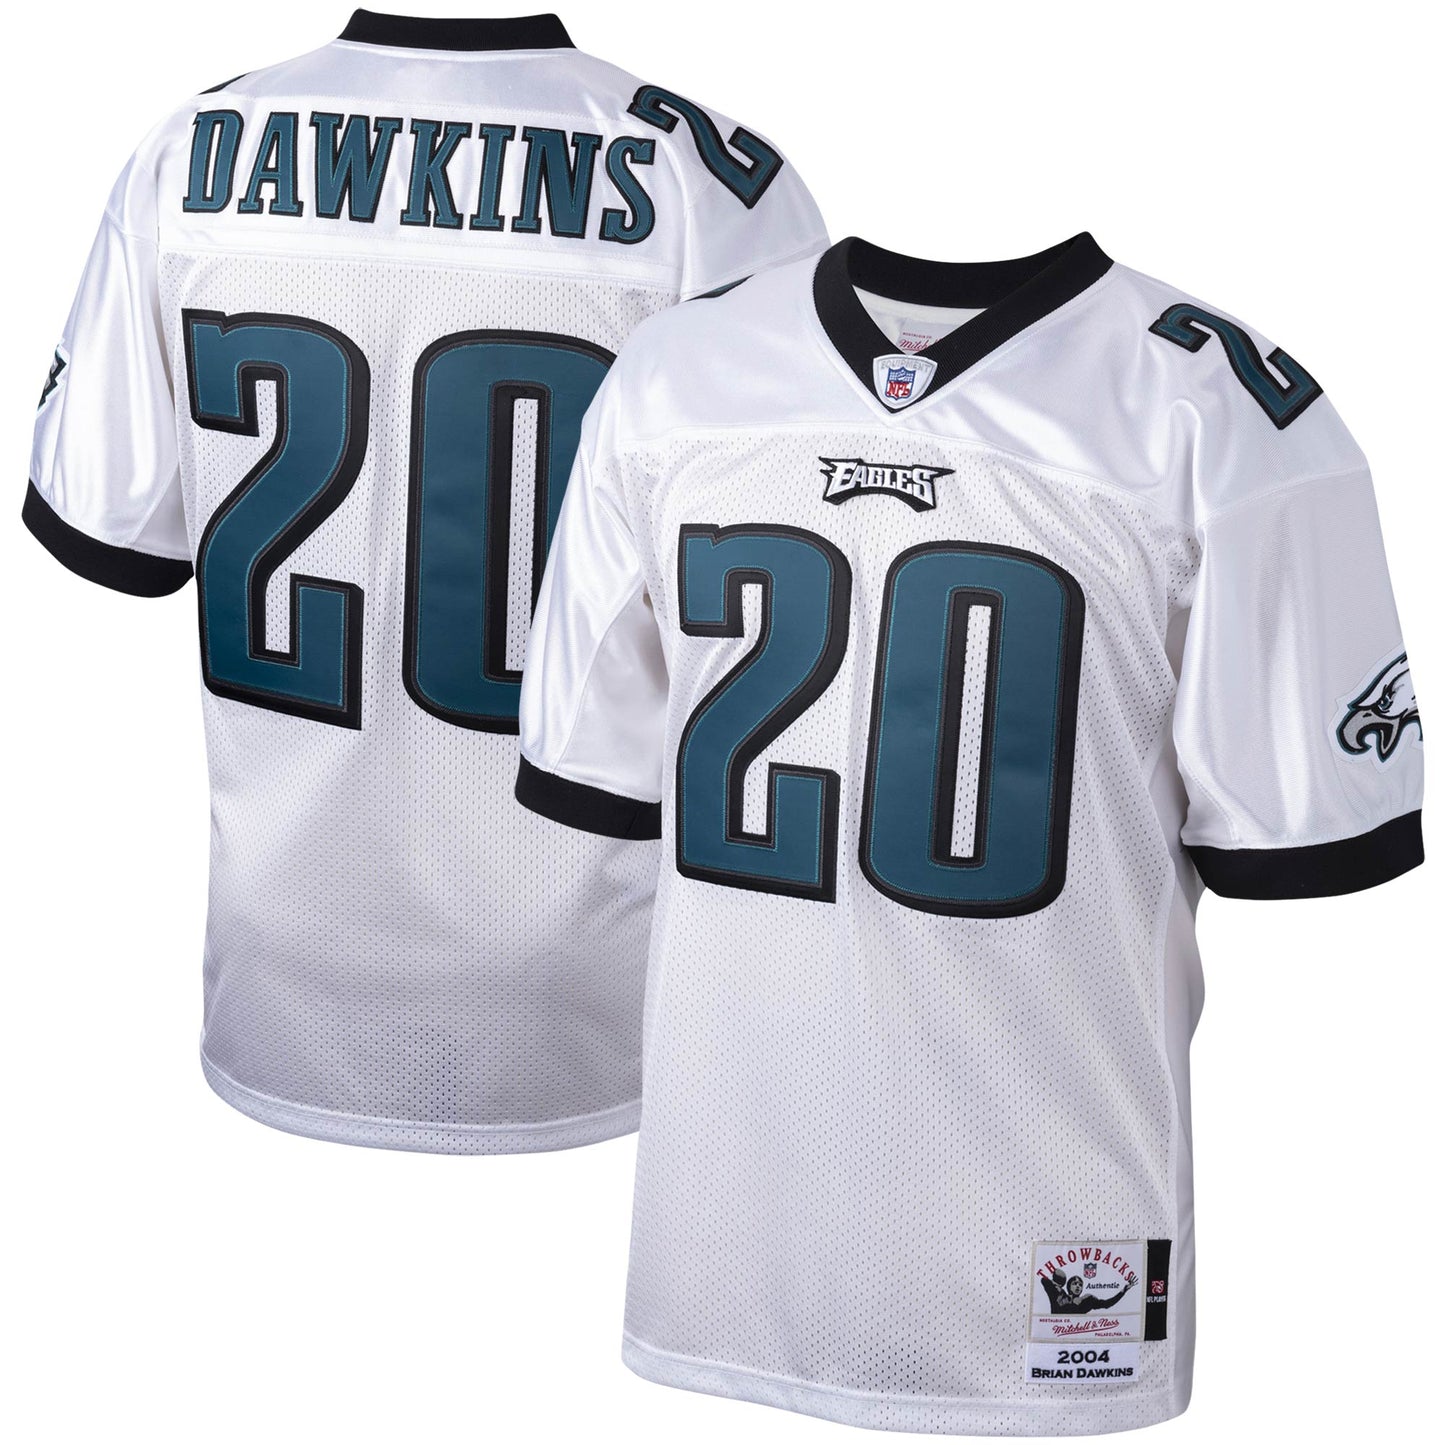 Brian Dawkins Philadelphia Eagles Mitchell & Ness 2004 Authentic Throwback Retired Player Jersey - White